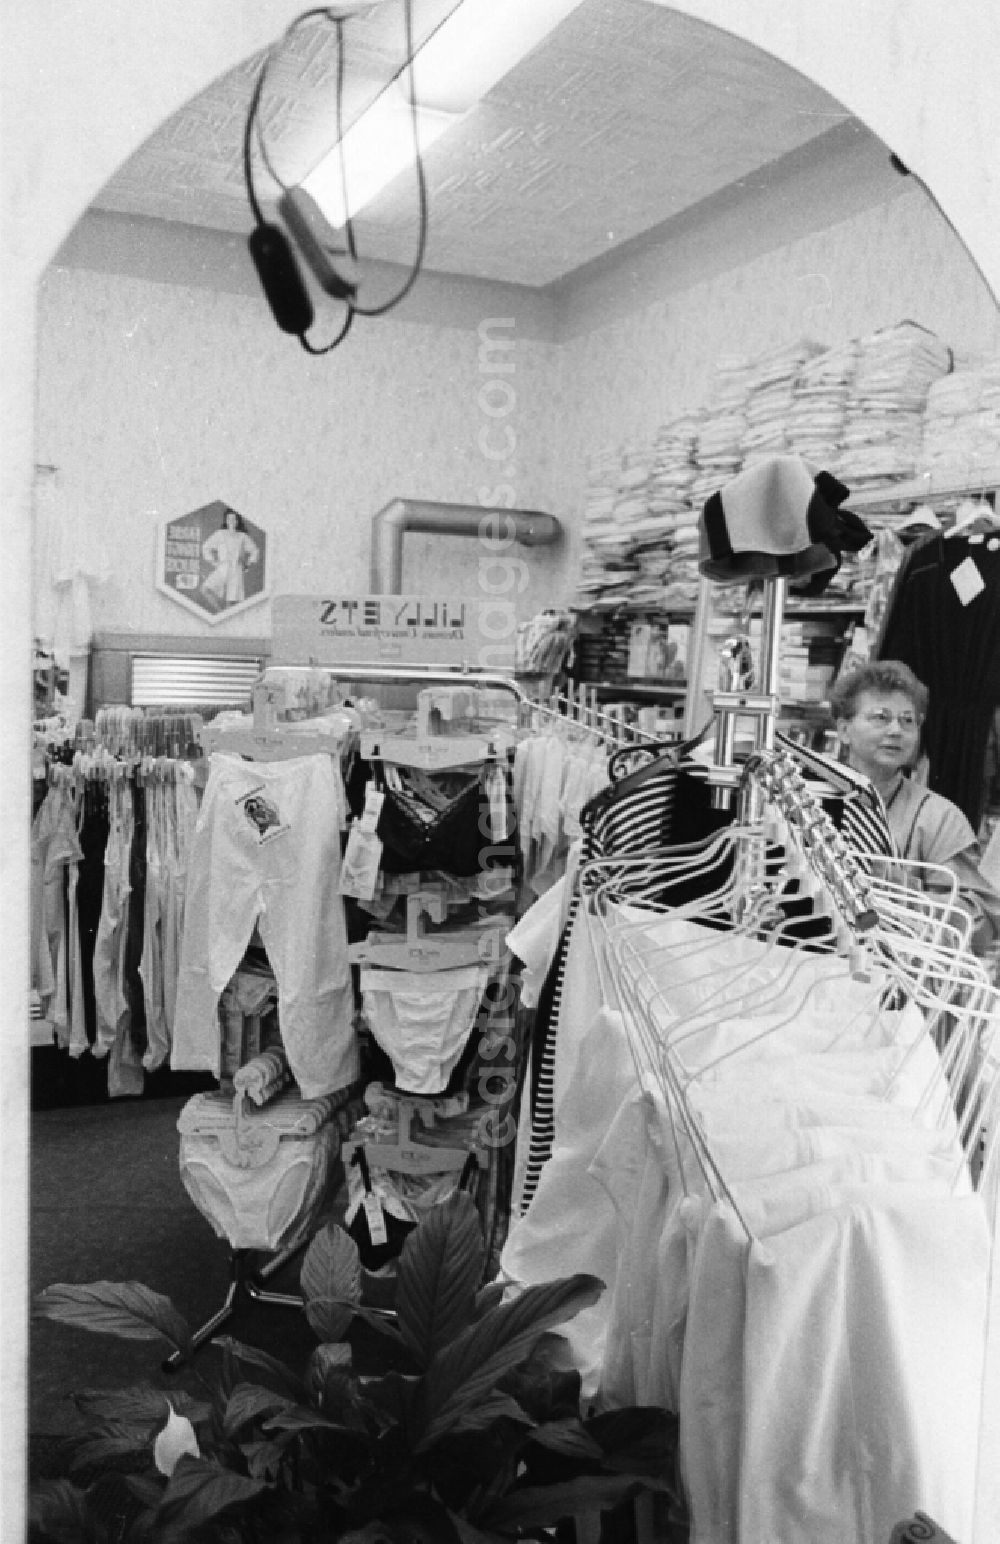 GDR picture archive: Berlin - Shop for corsetry and workwear on Frankfurter Allee in Berlin Friedrichshain, former capital of the GDR, German Democratic Republic